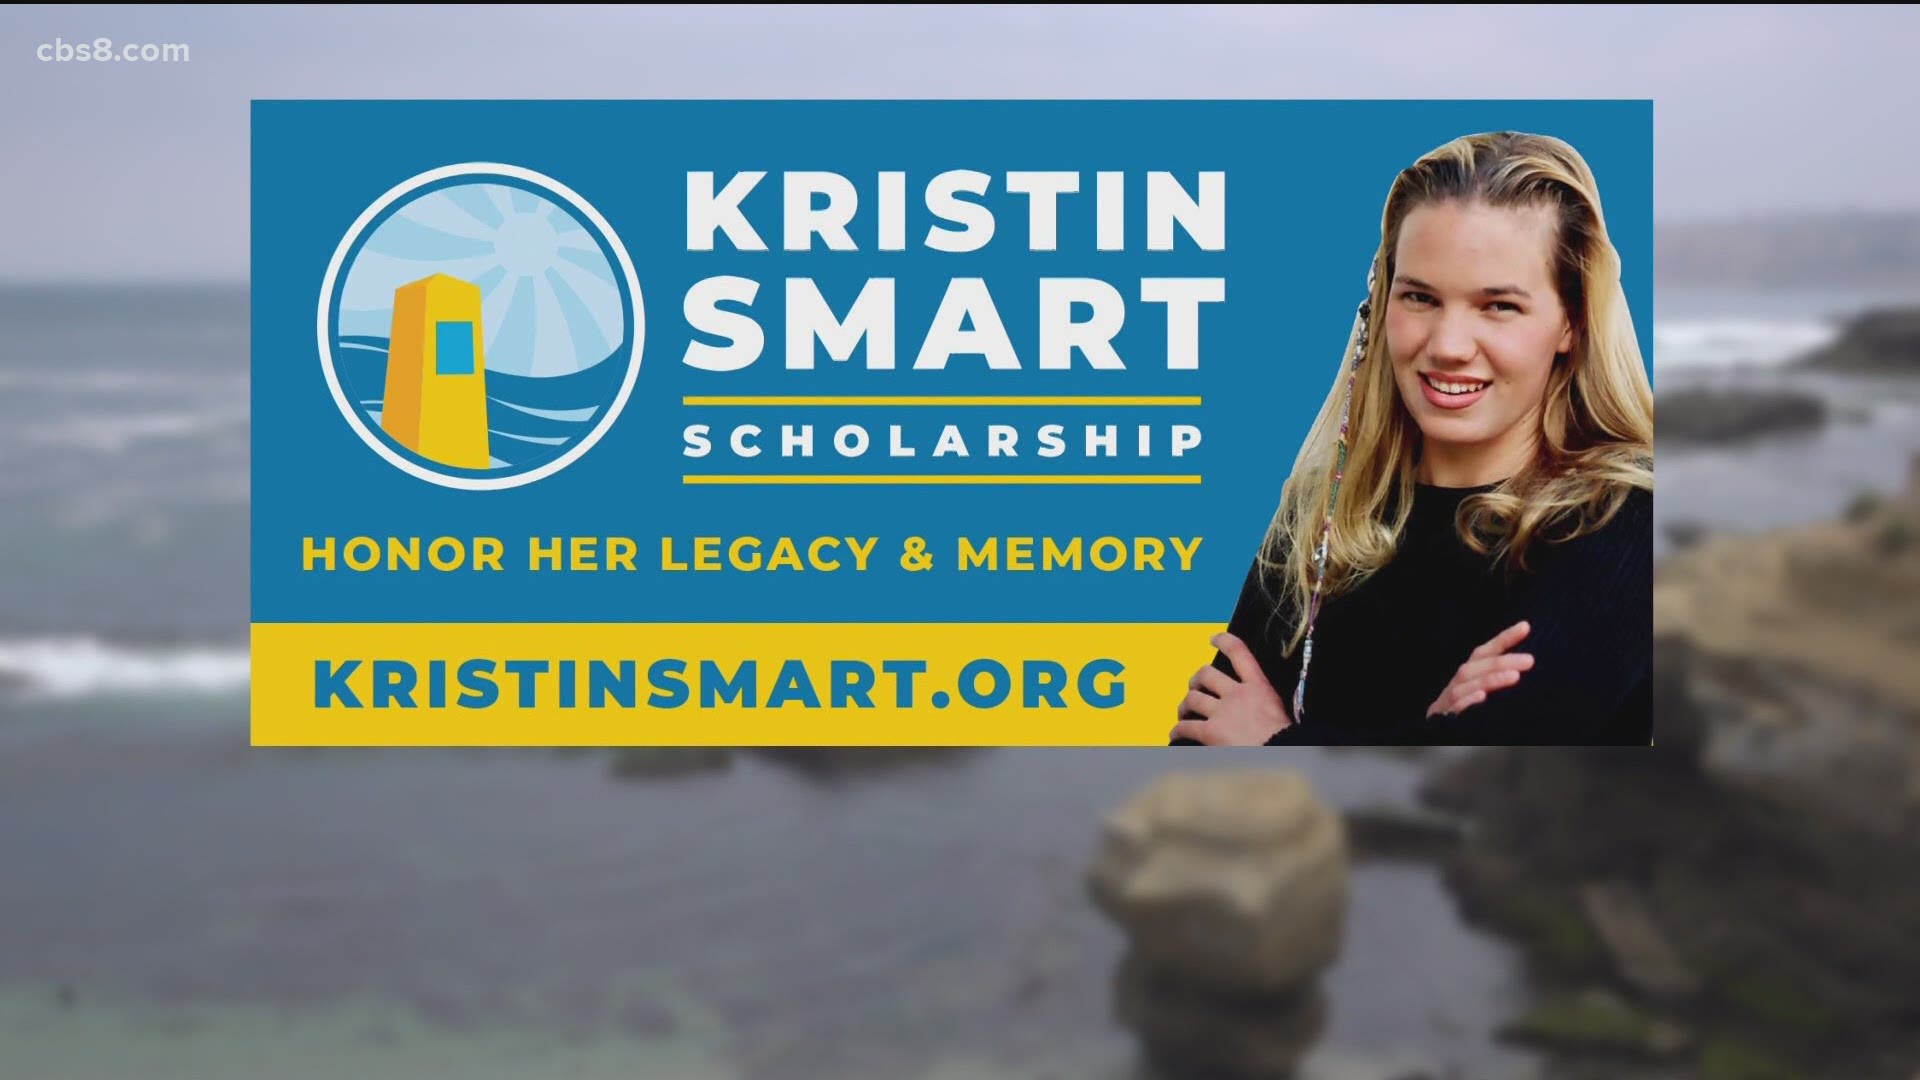 "My family knows we can’t change the past, instead we are moving forward to honor Kristin’s life and legacy through the Kristin Smart Scholarship."